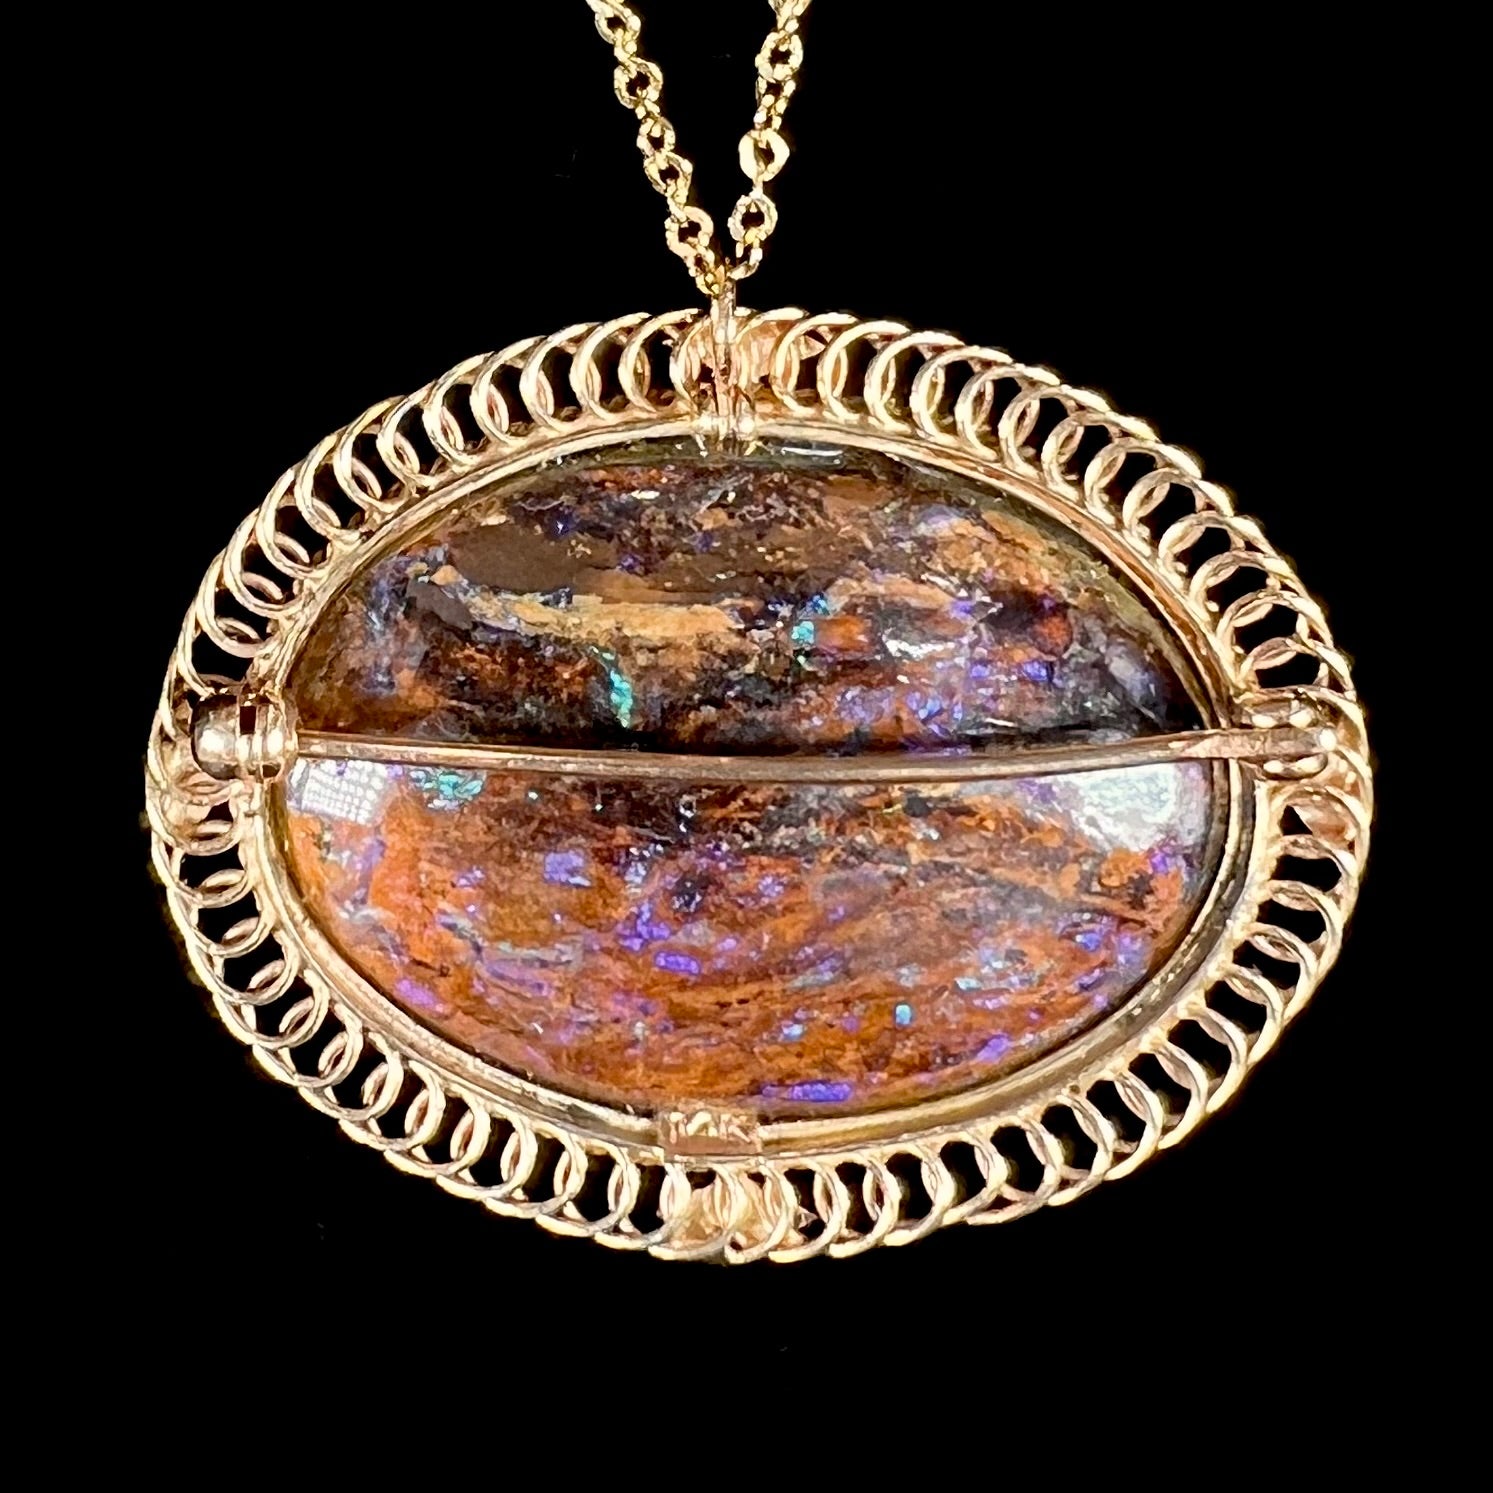 A yellow gold filigree style brooch/pendant combination piece set with a purple opalized wood stone from Duck Creek, Australia.